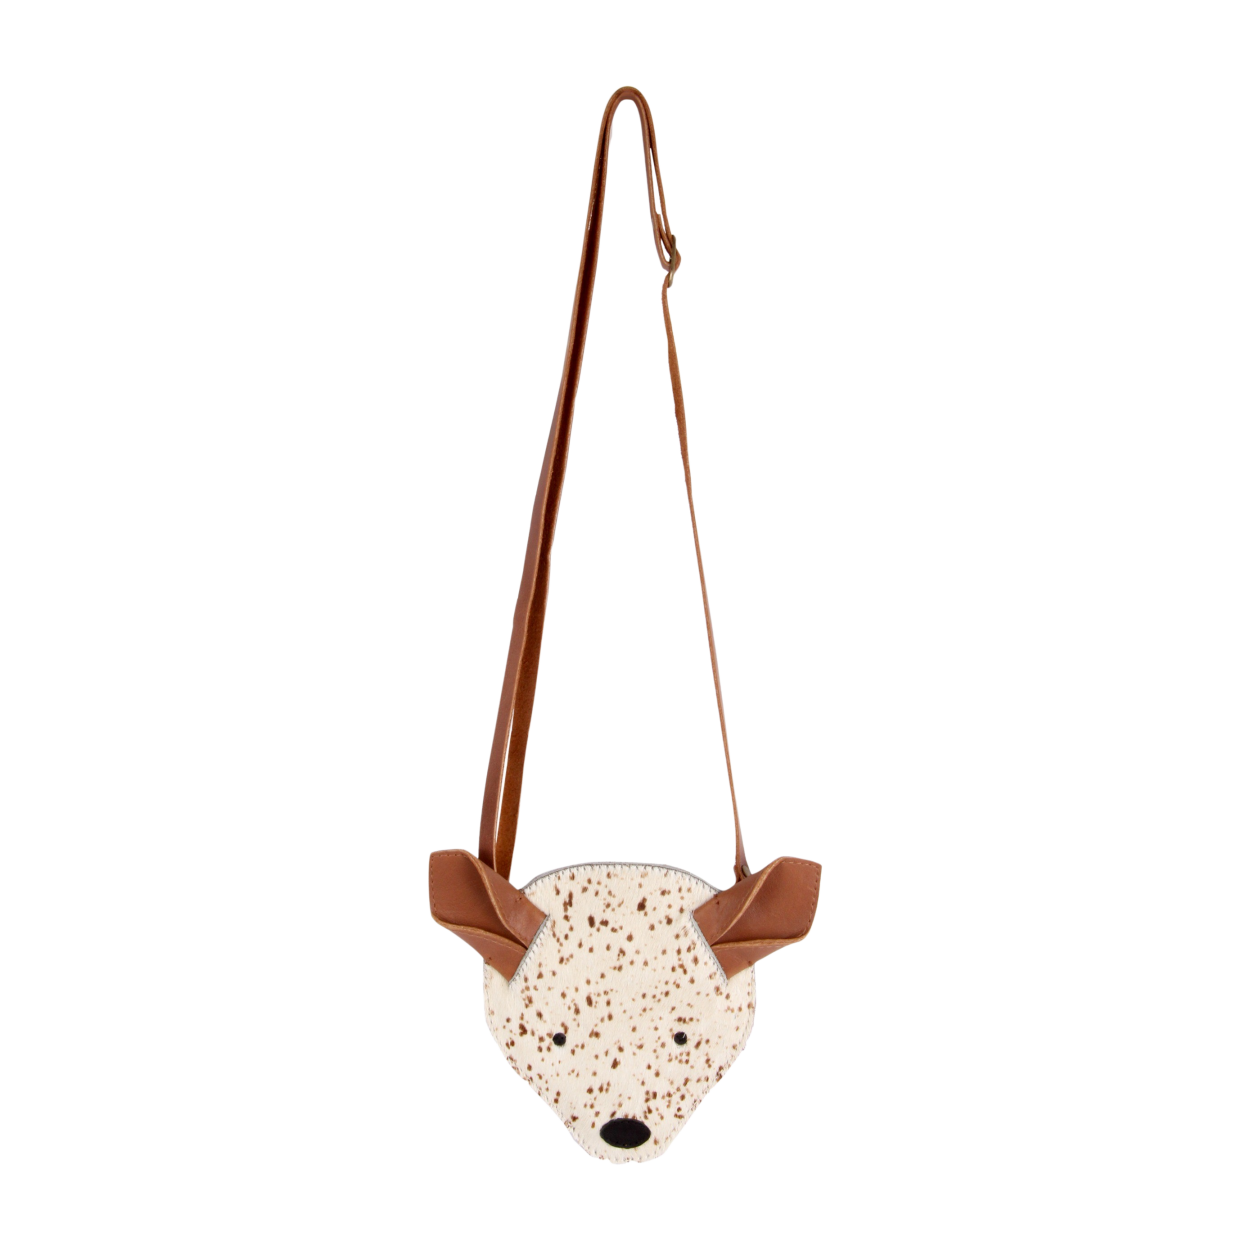 Britta Exclusive Purse | Bambi | Bambi Spotted Cow Hair